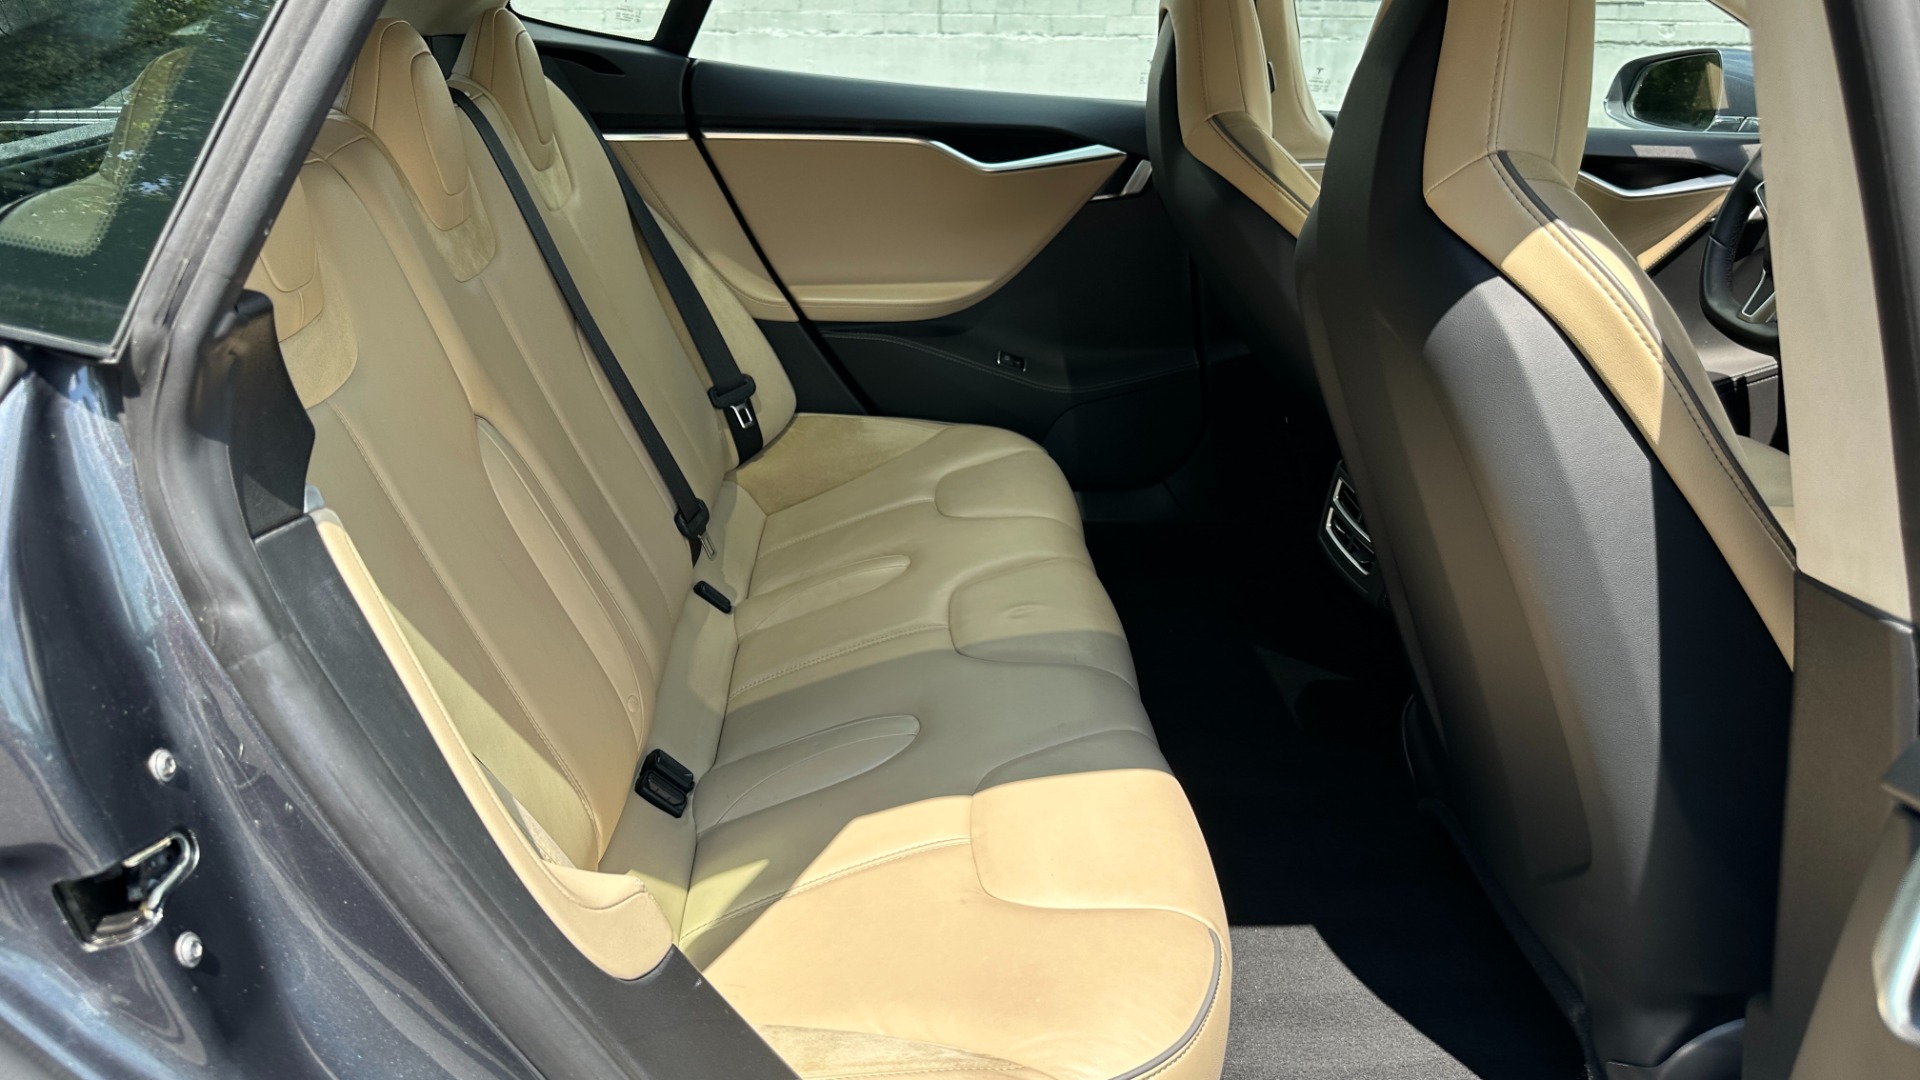 Used 2014 Tesla Model S 60 kWh Battery / 60D / PREMIUM CONNECTIVITY / LEATHER / SUNROOF for sale $22,995 at Formula Imports in Charlotte NC 28227 30